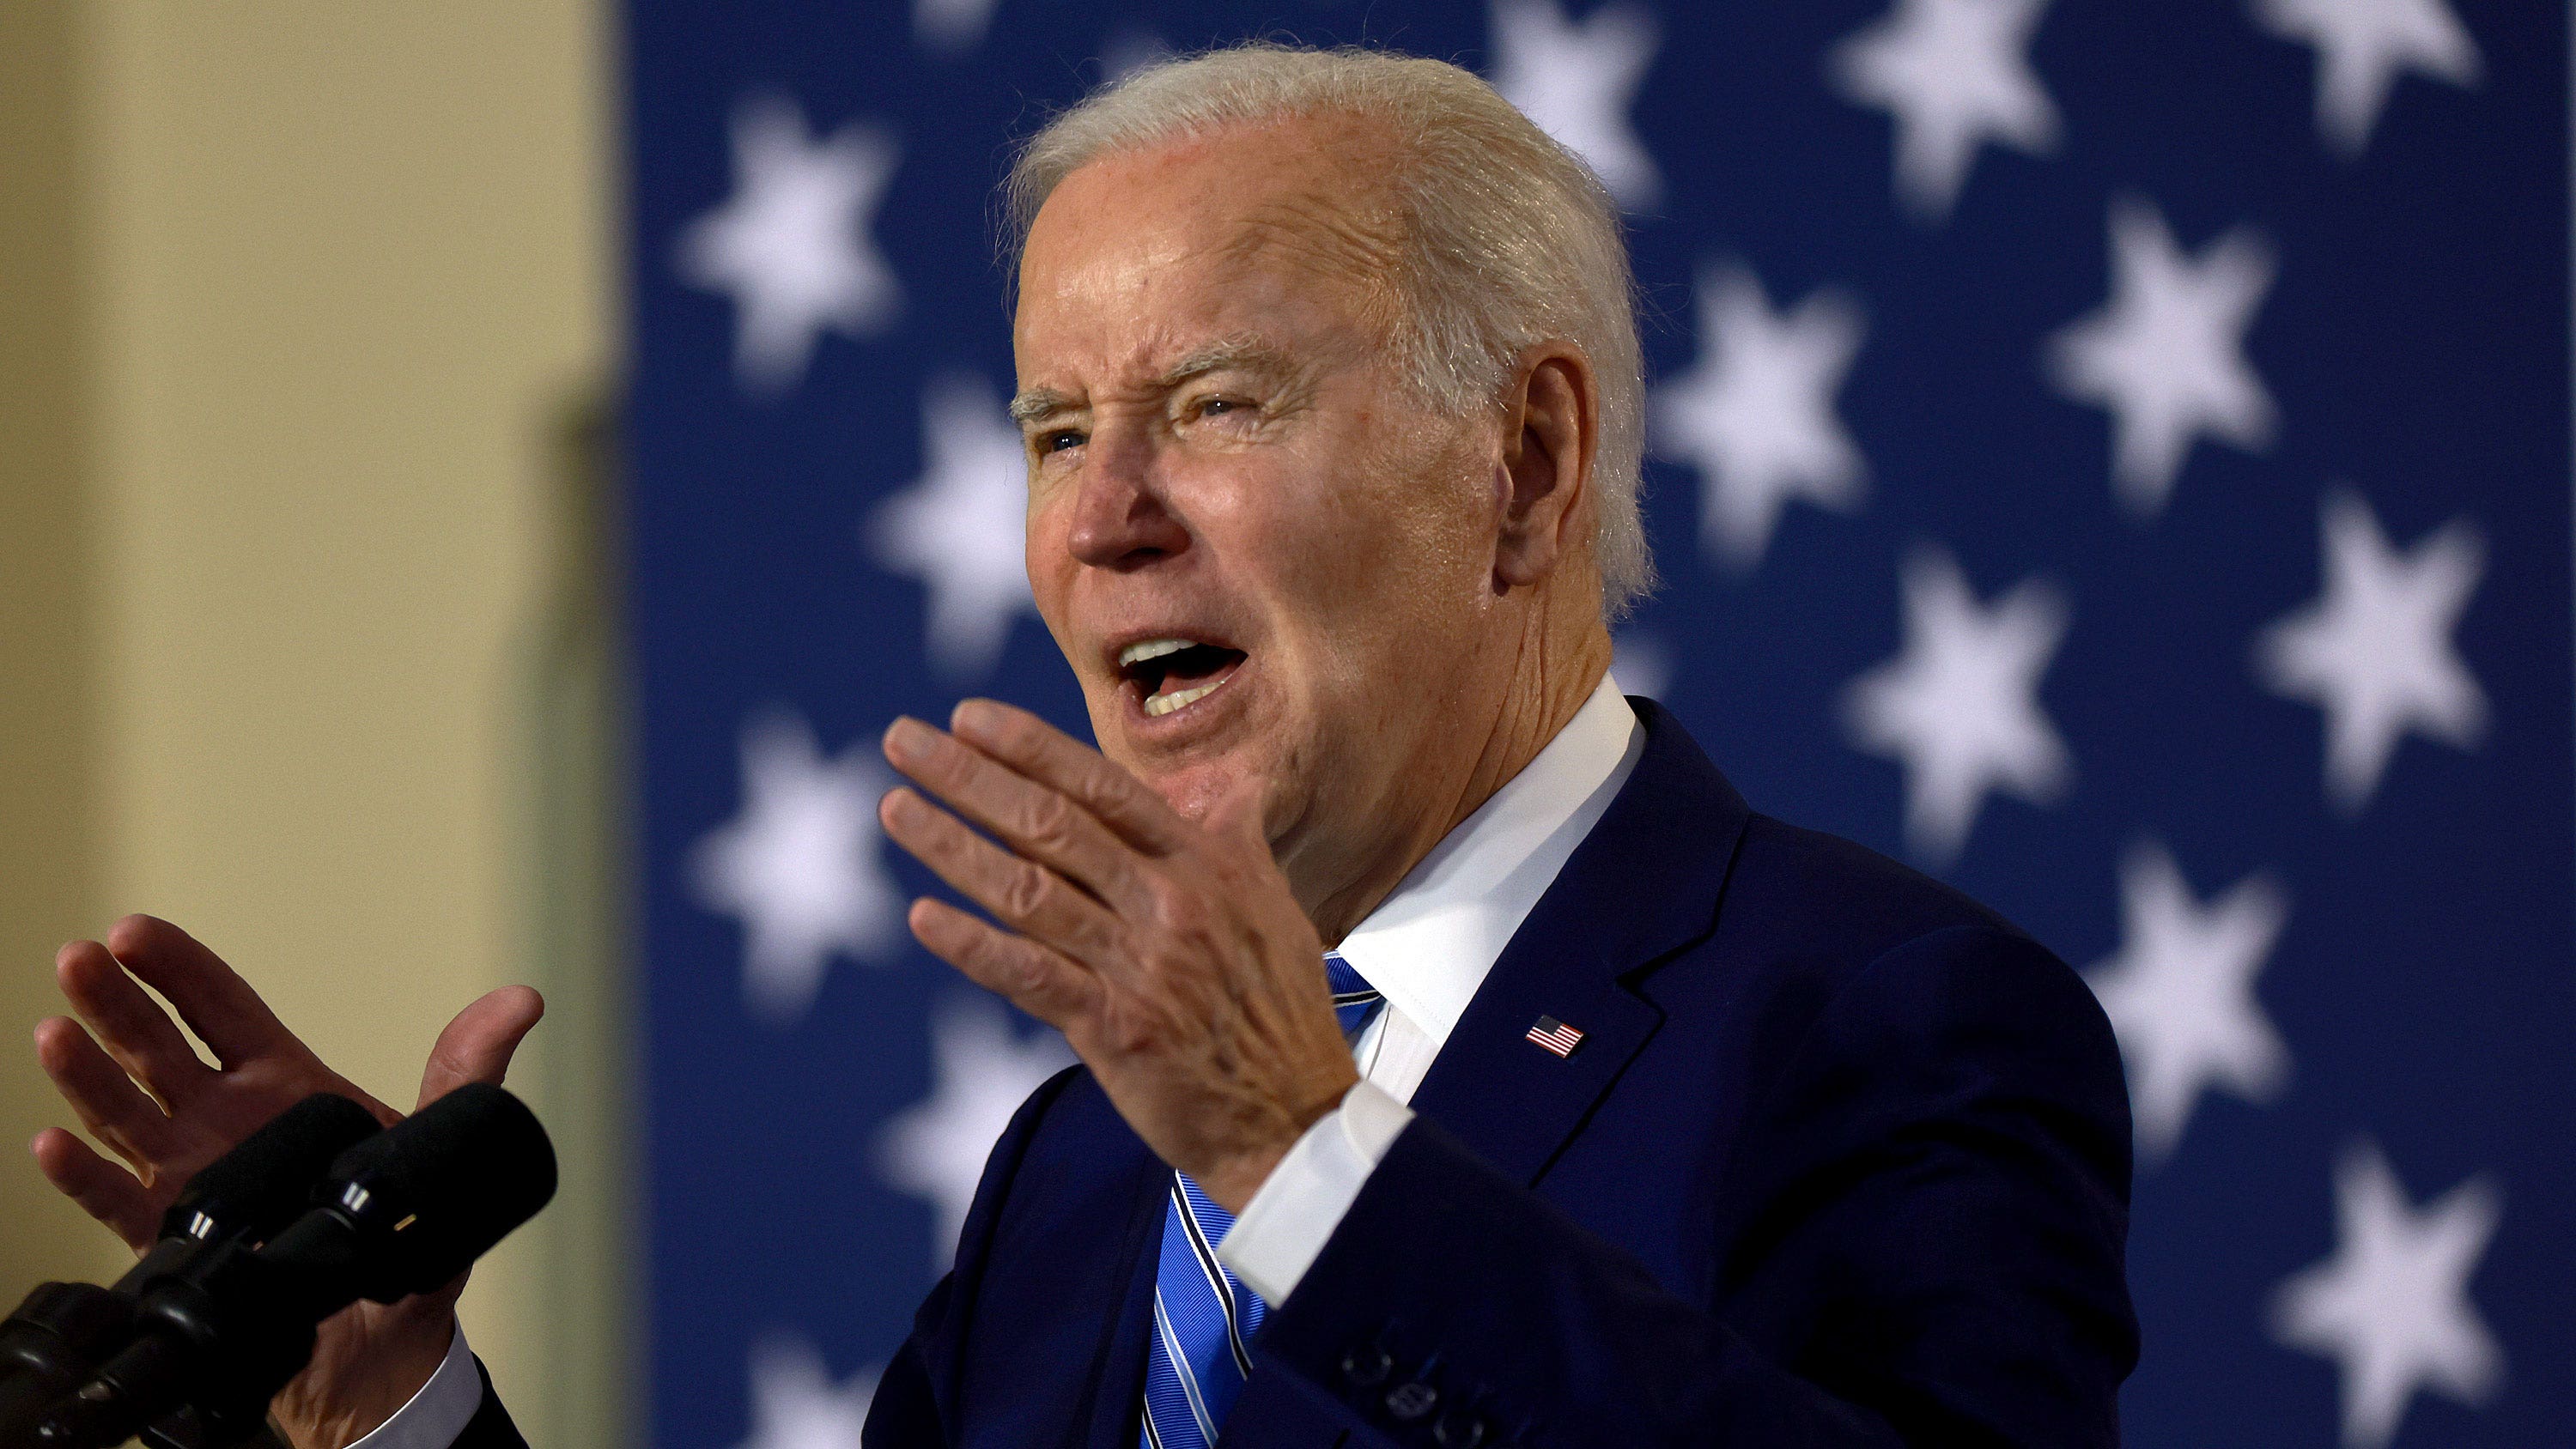 Biden’s Twitter account fact-checked for dubious claim about the taxes billionaires pay